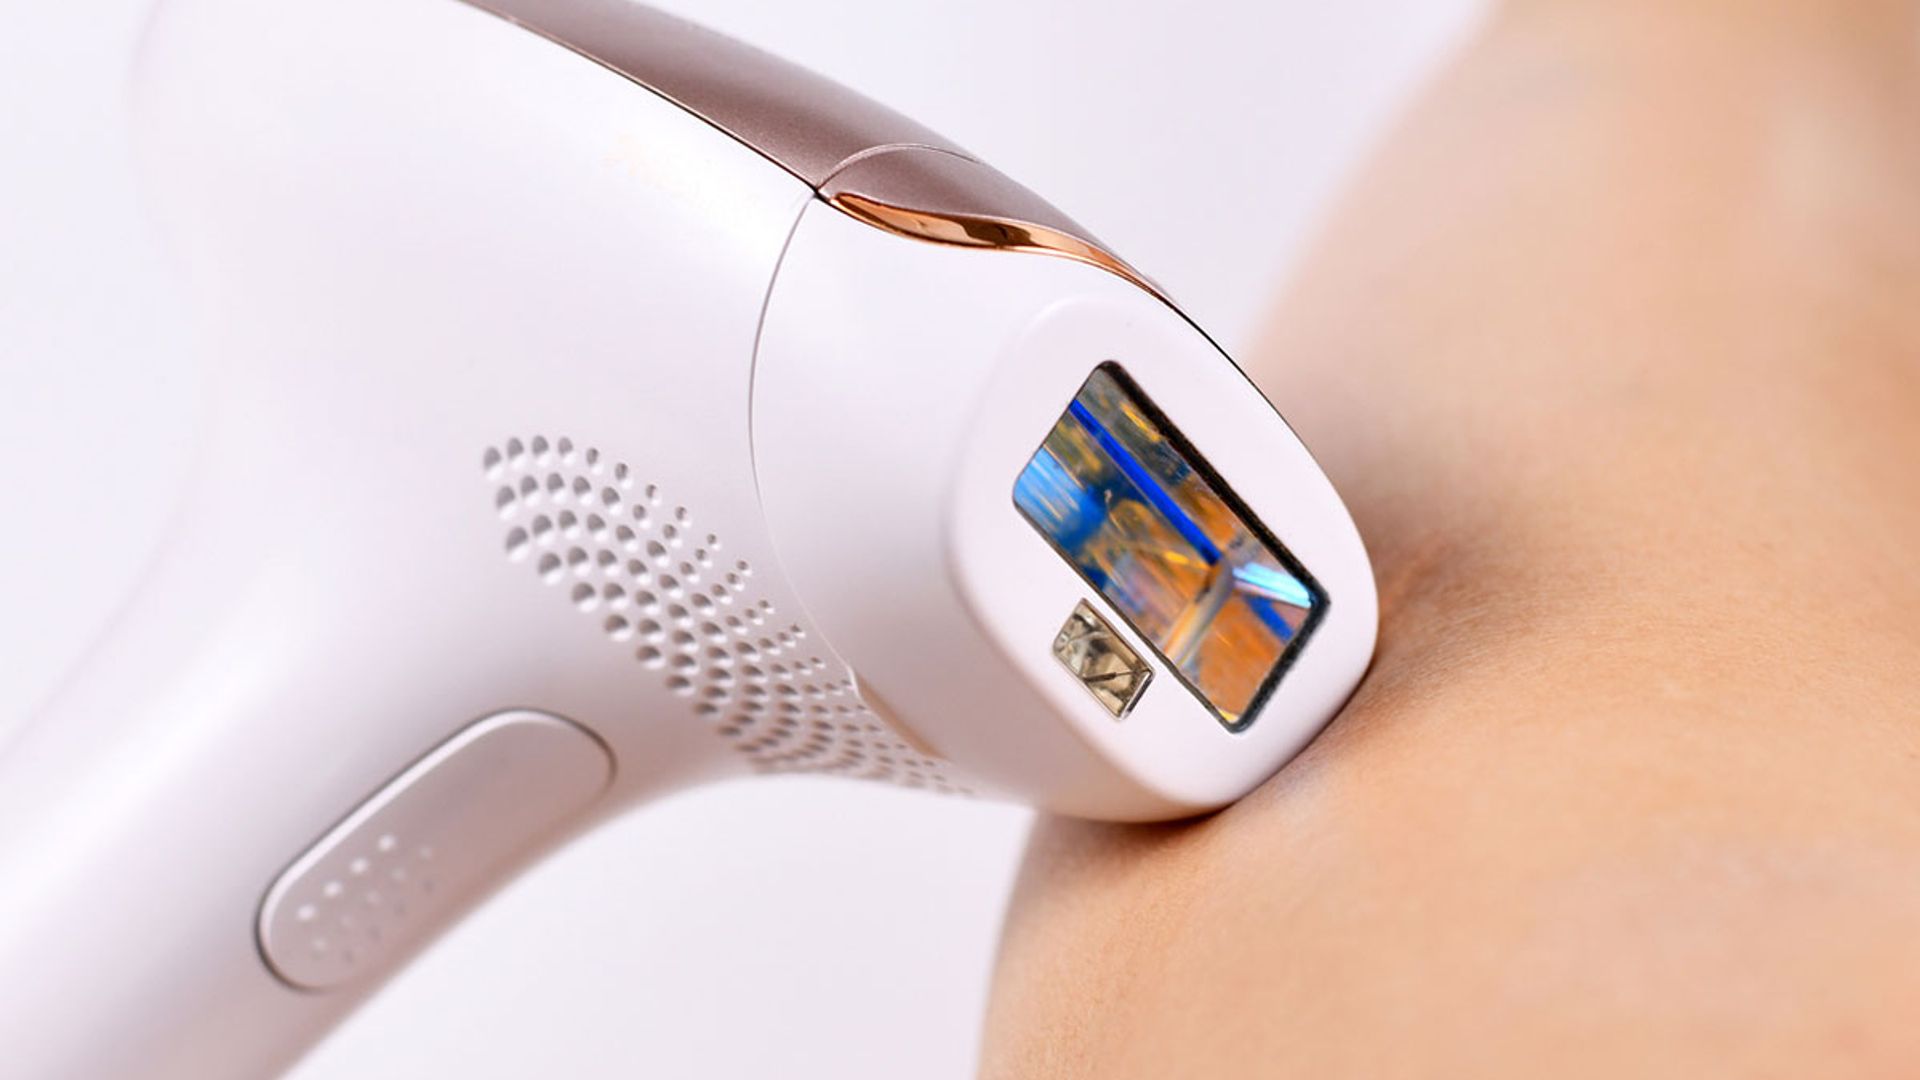 IPL & Laser Hair Removal Devices